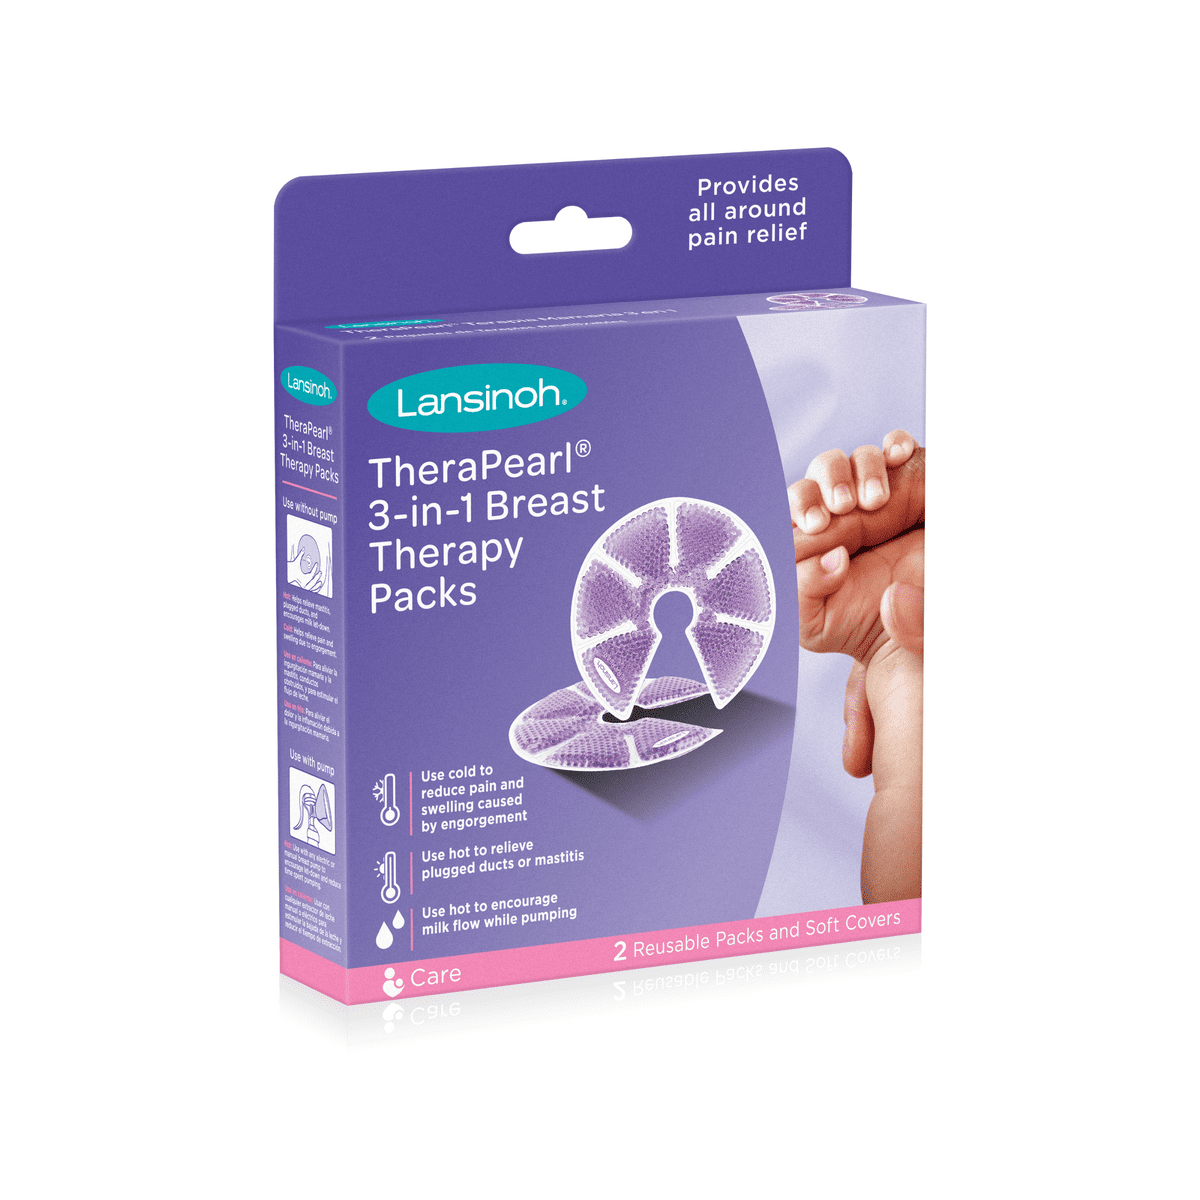 Lansinoh TheraPearl 3-in-1 Breast Hot Cold Therapy 2 Reusable Packs  w/Covers